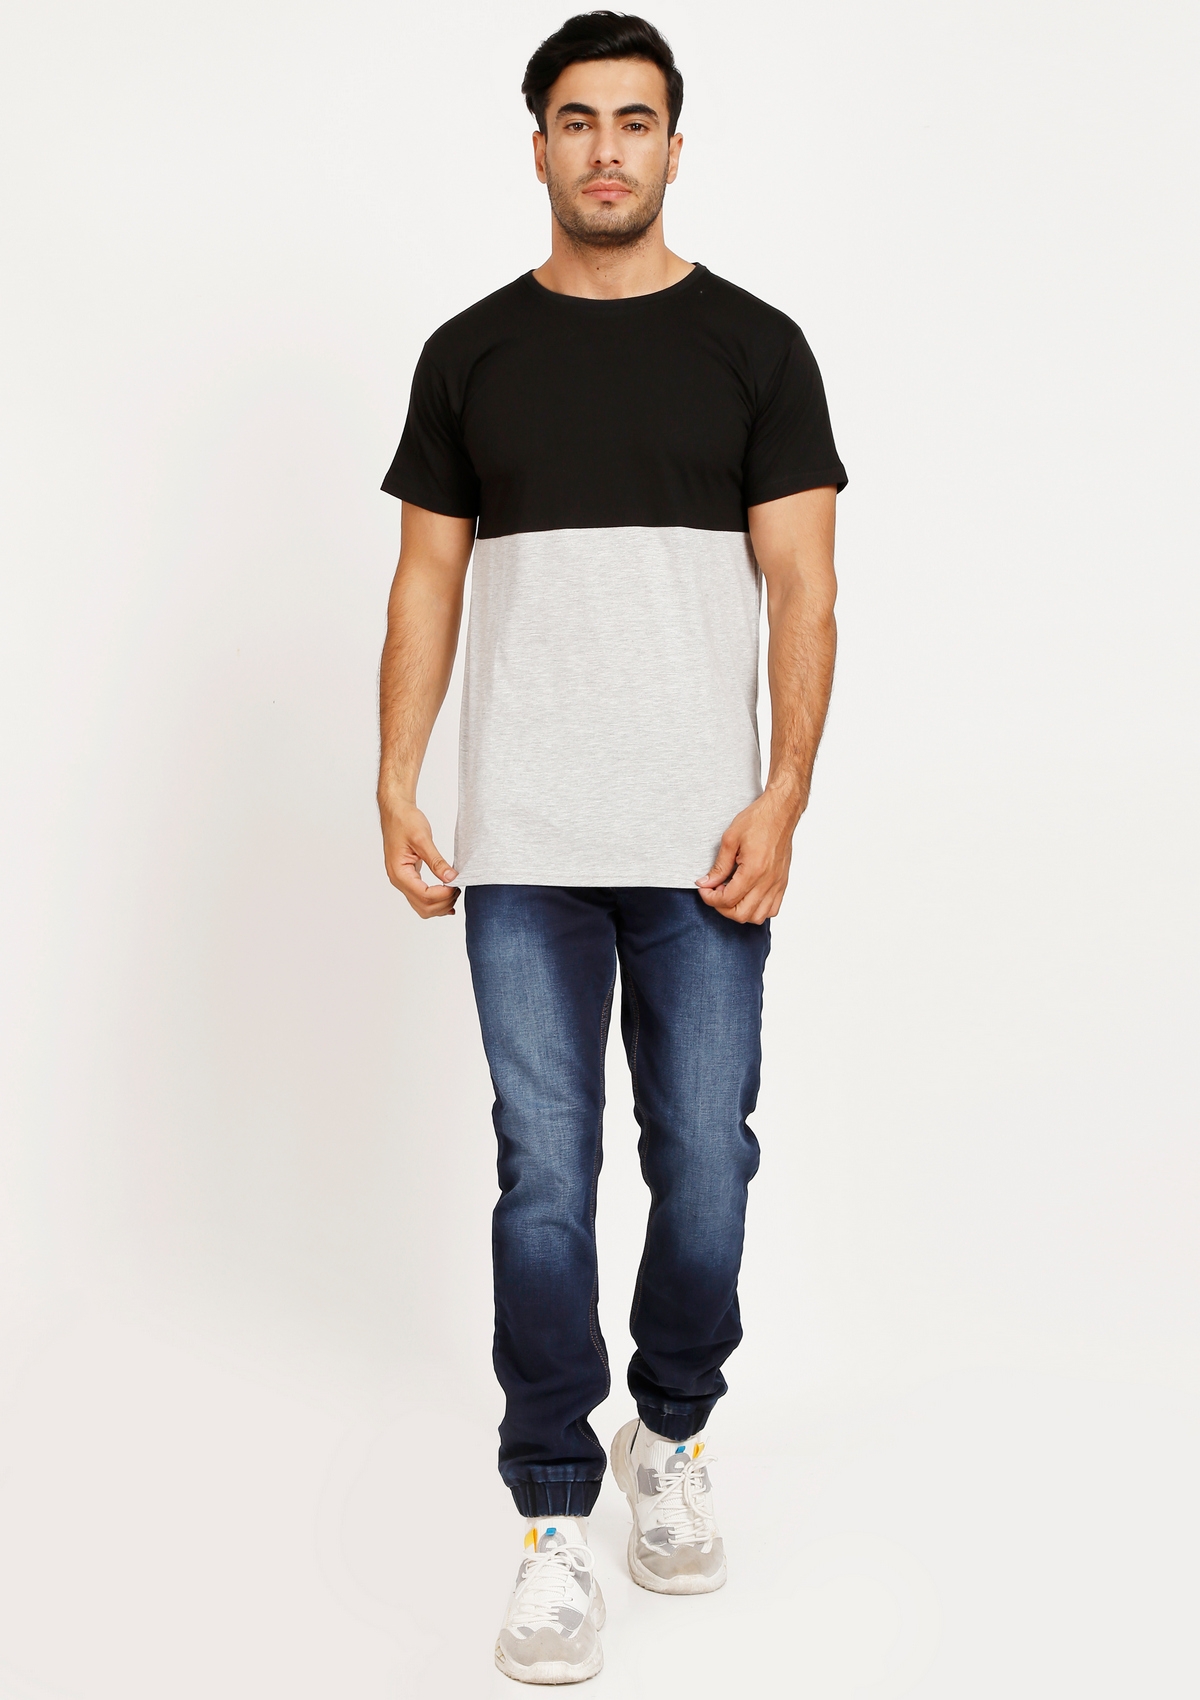 Bottle&Co | Grey and Black Colourblock T-Shirts 